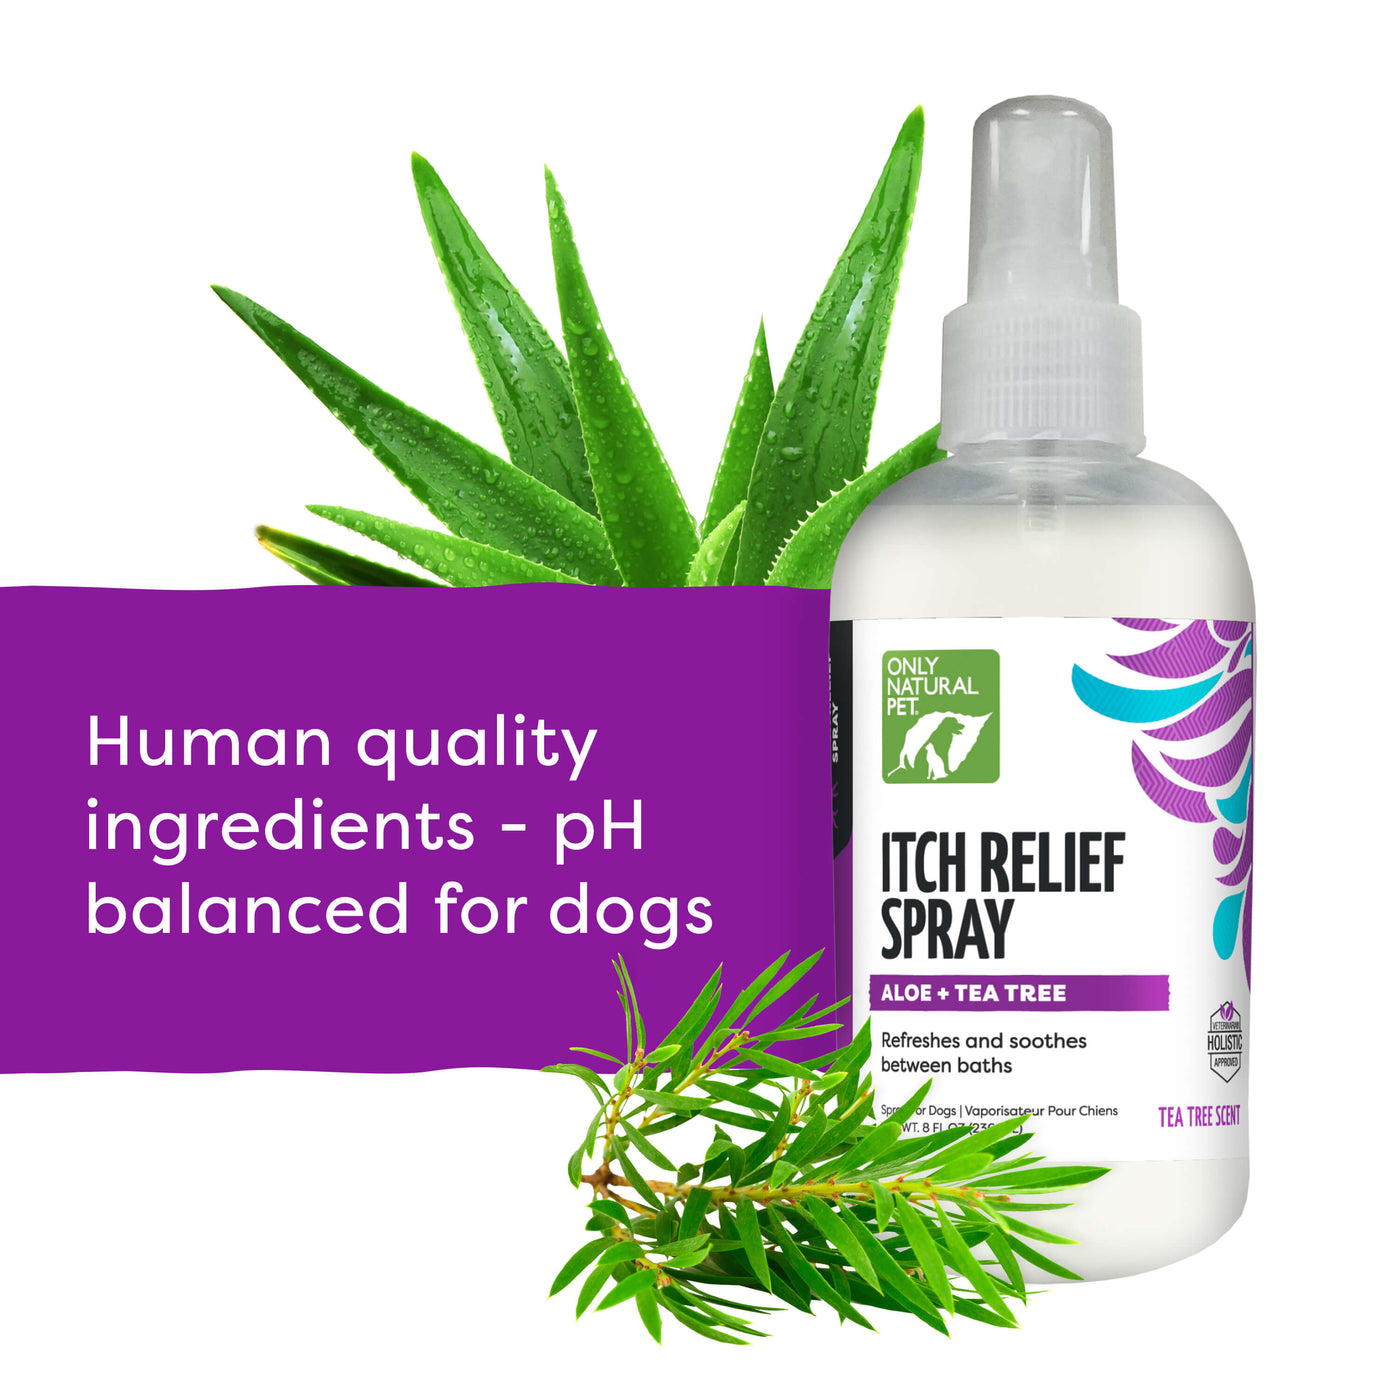 Itch Relief Spray with Aloe + Tea Tree for Dogs